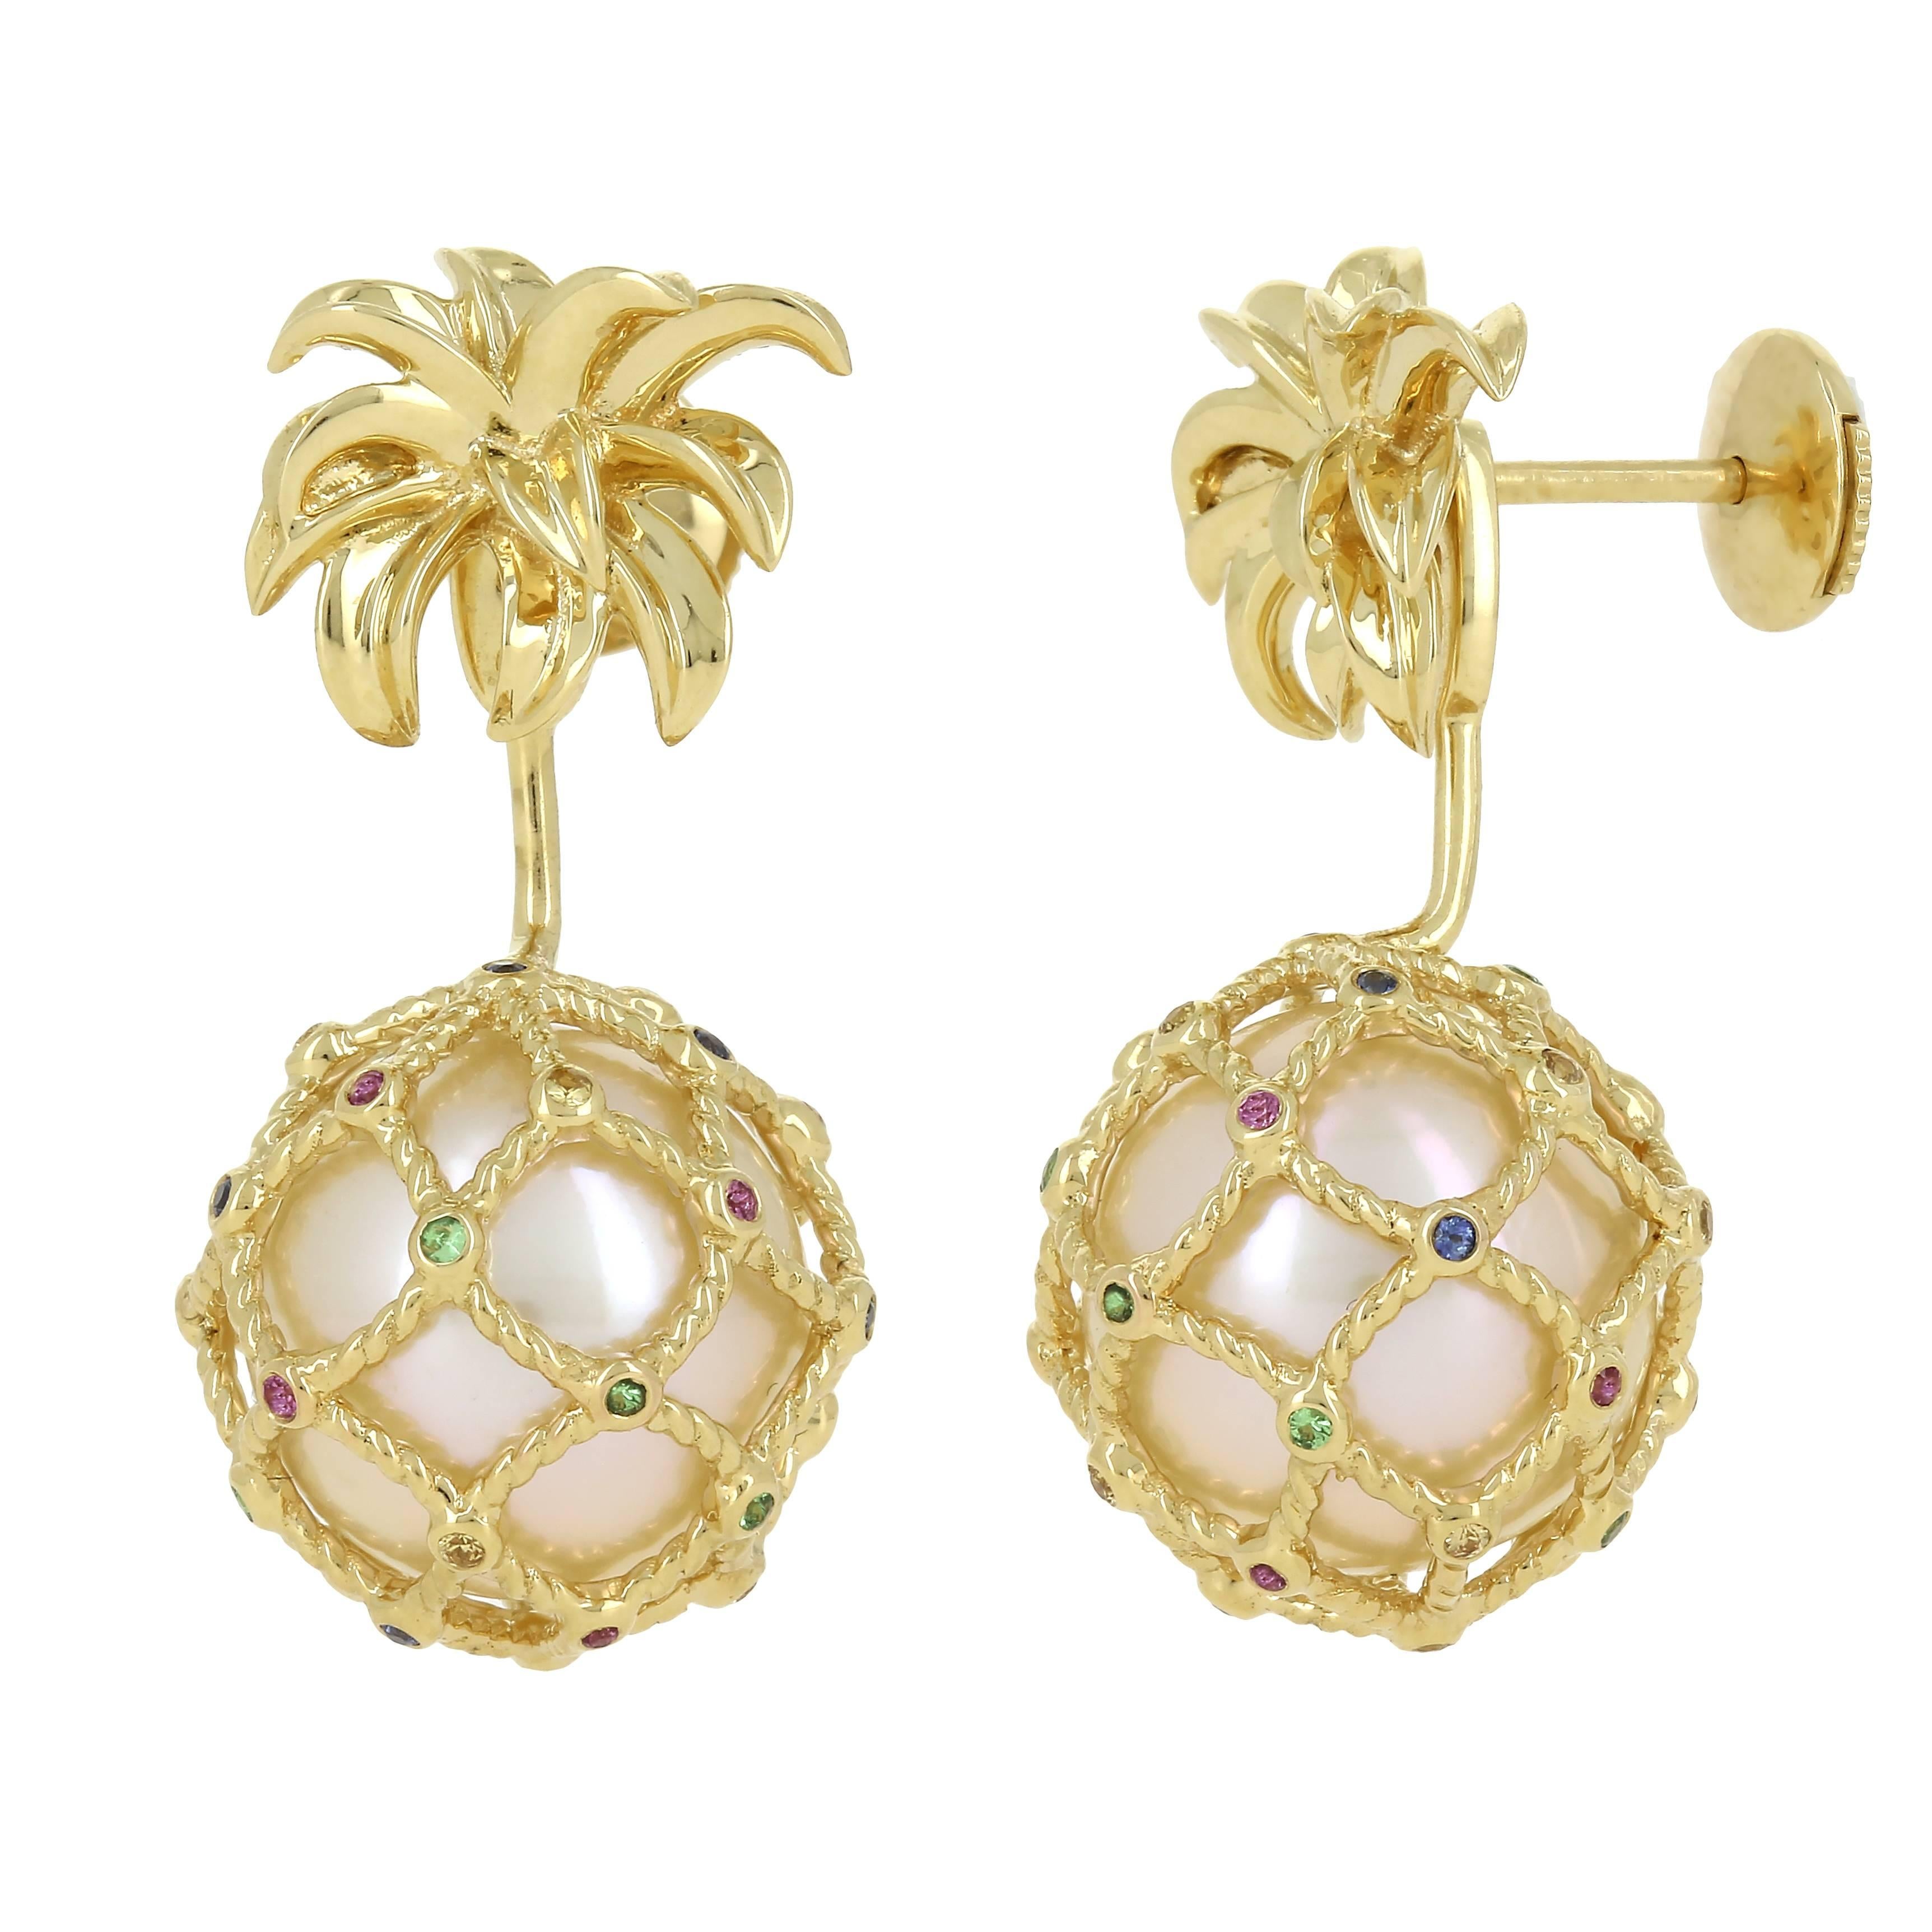 Yvonne Leon's Earring Pineapple in 18 Karat Gold Pearl and Multicolored Sapphire